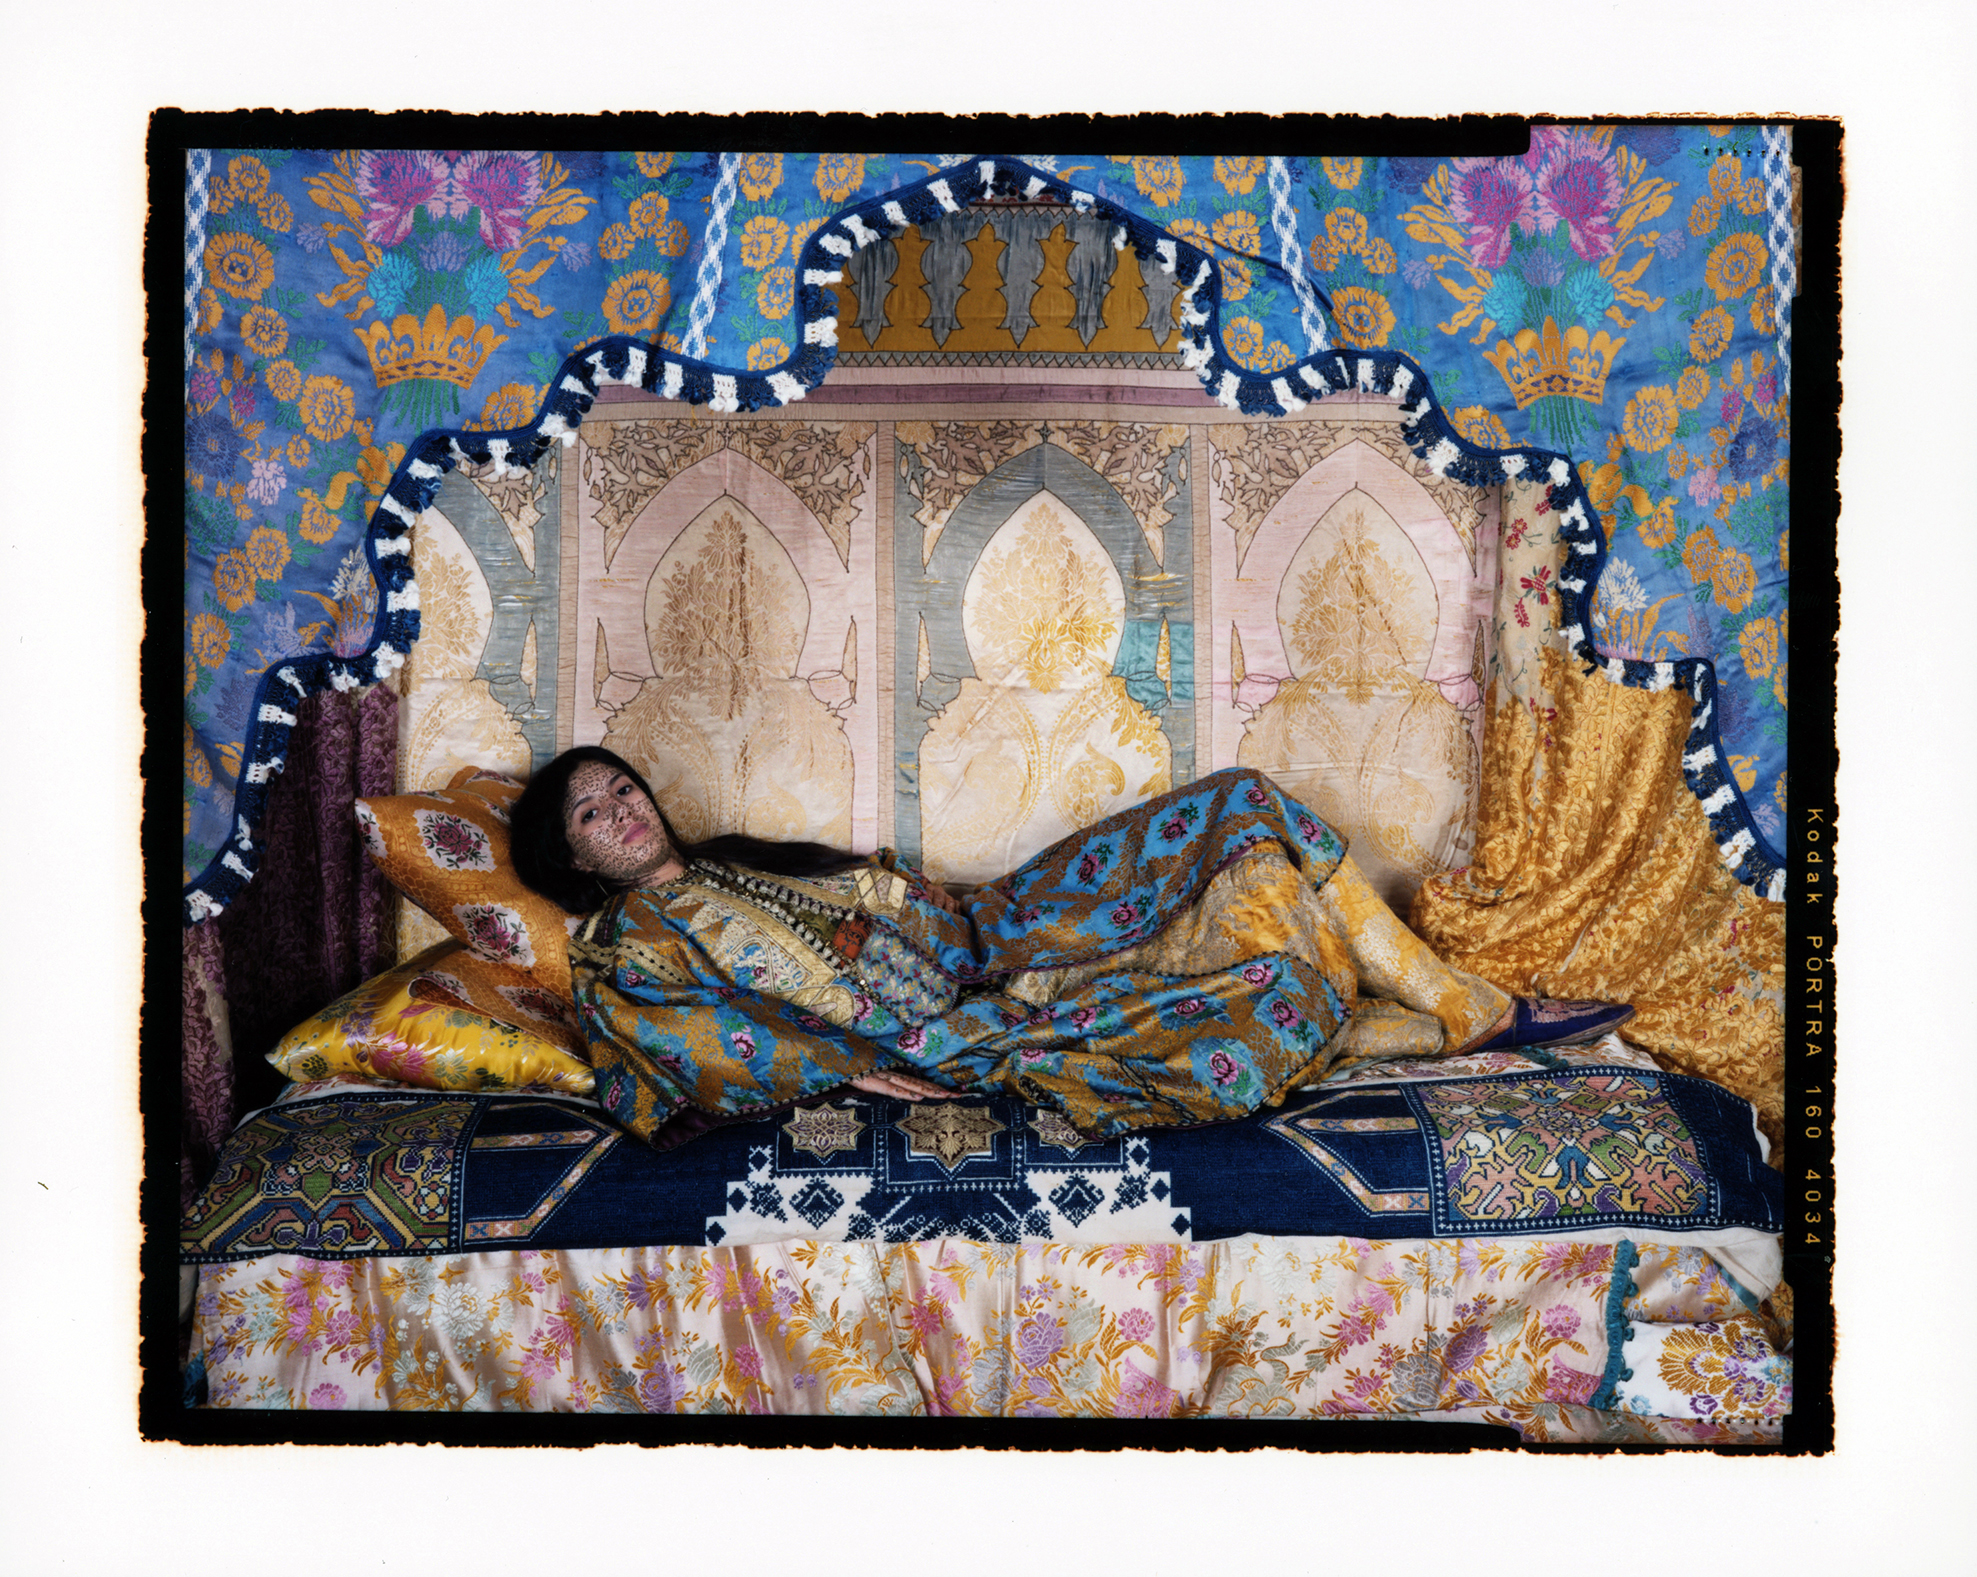 A colorful, staged photograph features a light-skinned woman with long dark hair reclined on a luxurious day bed covered in textiles featuring patterns from the Arab world. Her head is propped up on two, yellow patterned silk pillows and she looks straight at the camera. Her skin is marked with black writing, unreadable at the distance the phot is taken. She is draped in colorful, patterned robe that is different from, but in the same color scheme of, the patterns behind her on the wall and those on the bed.